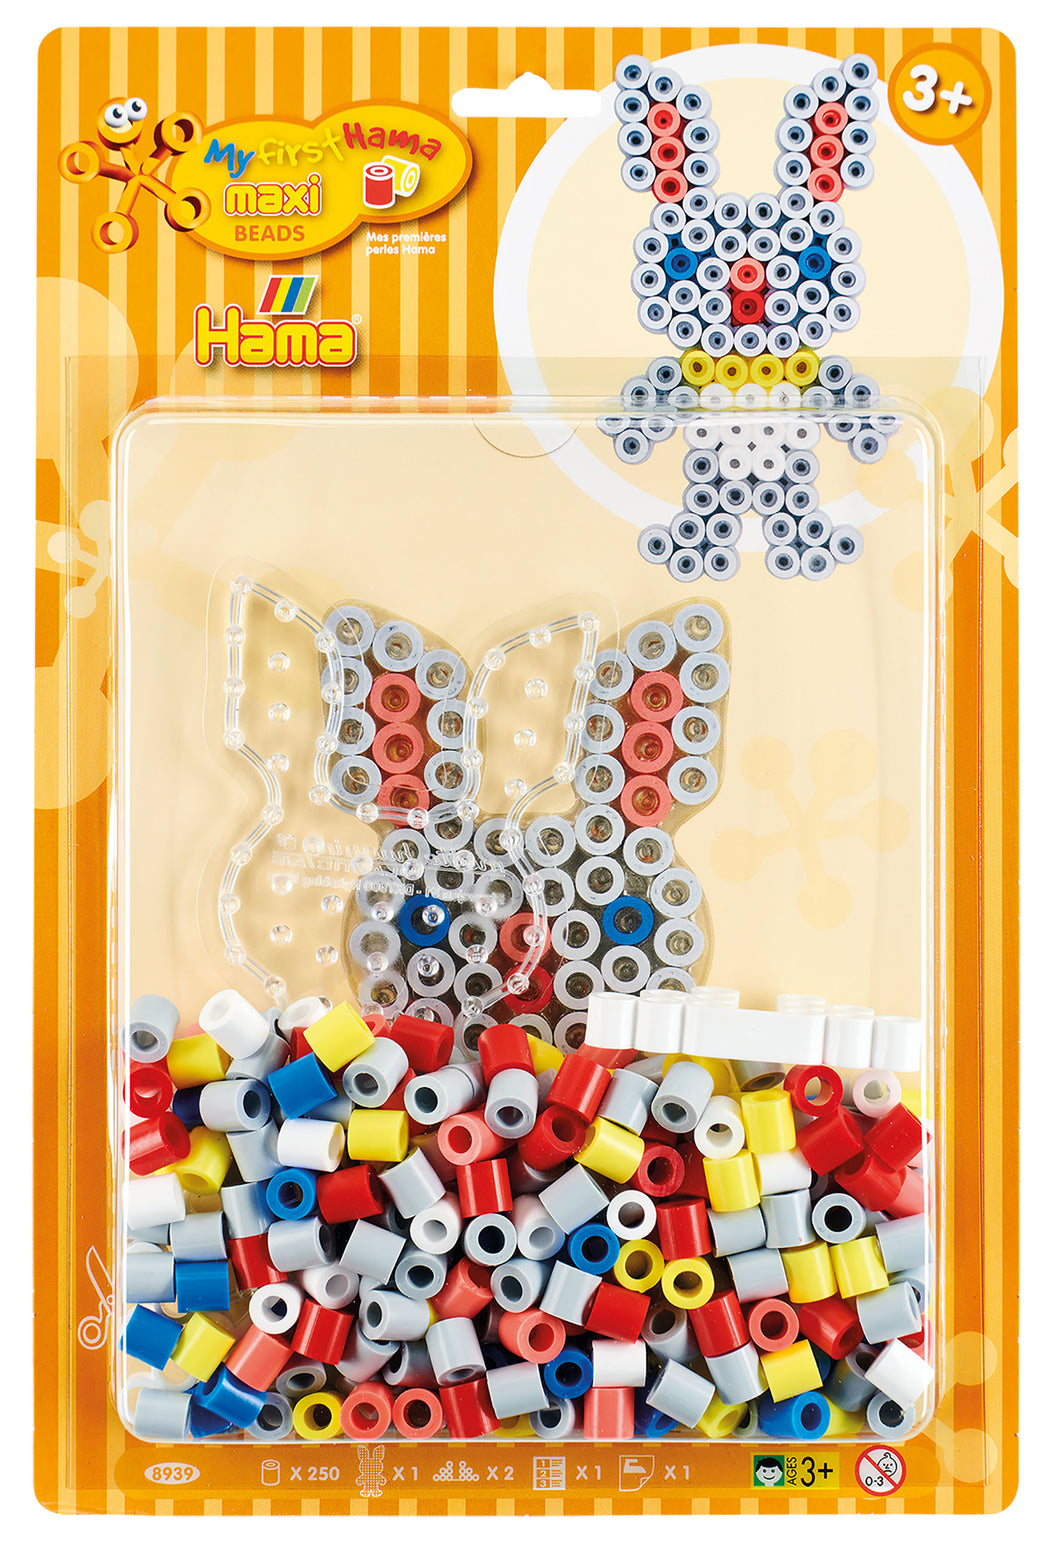 Easter Bunny Hama Maxi Large Blister Pack-250 Beads Bunny Pegboard, Bead Supports, Instructions and Ironin Paper